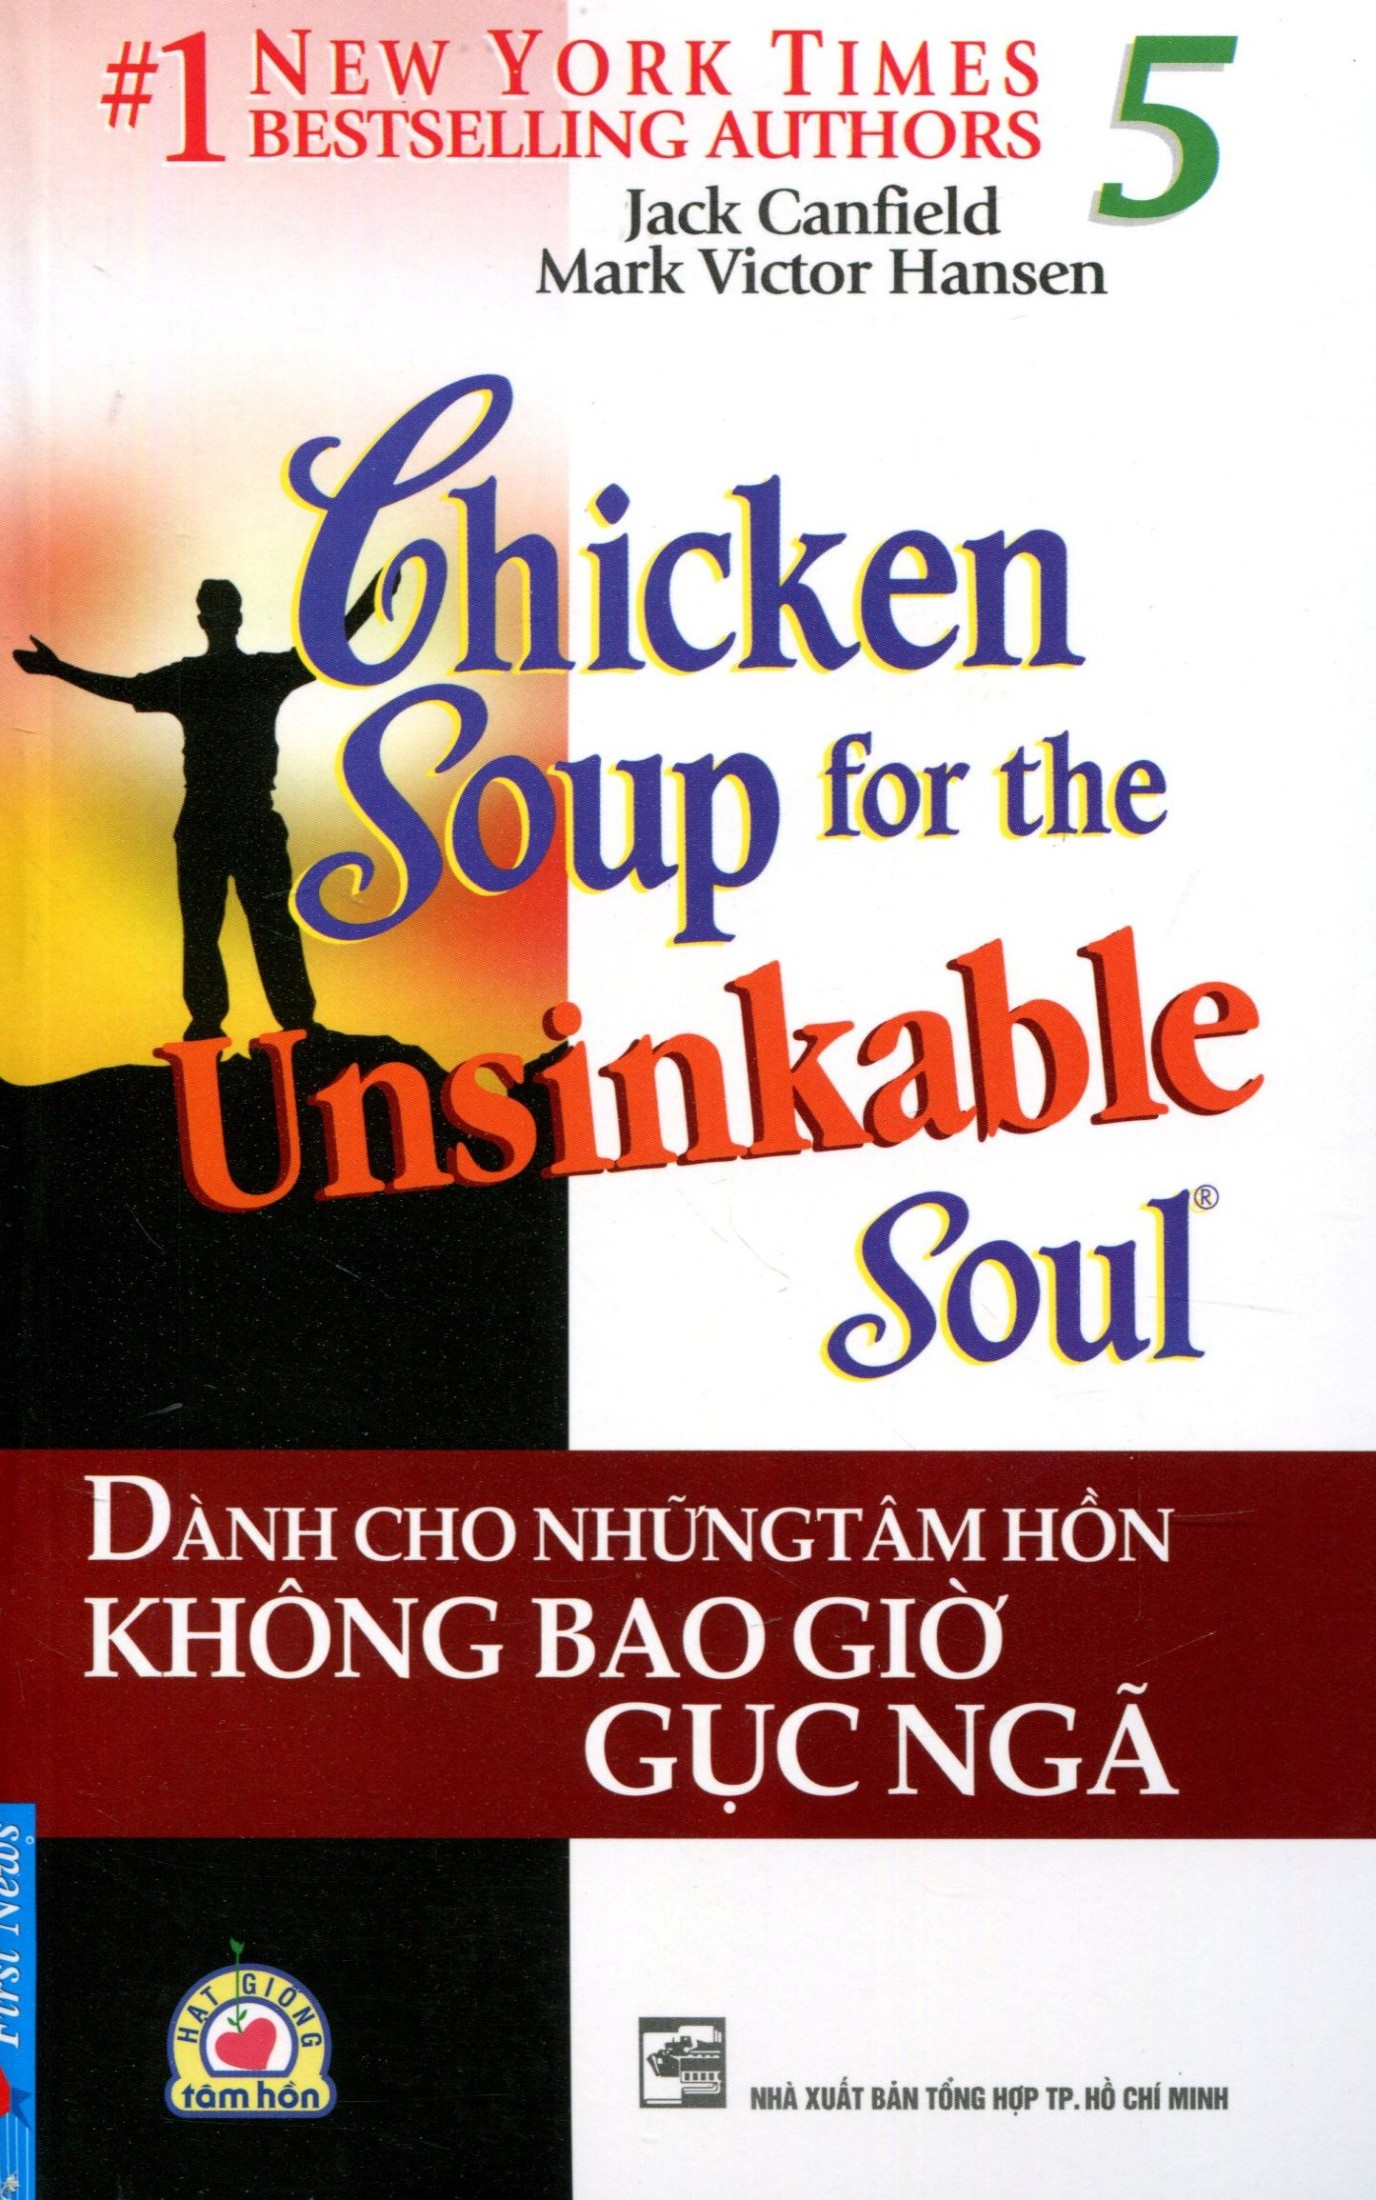 Chicken Soup for The Soul 5 - Jack Canfiel & Mark Victor Hanse